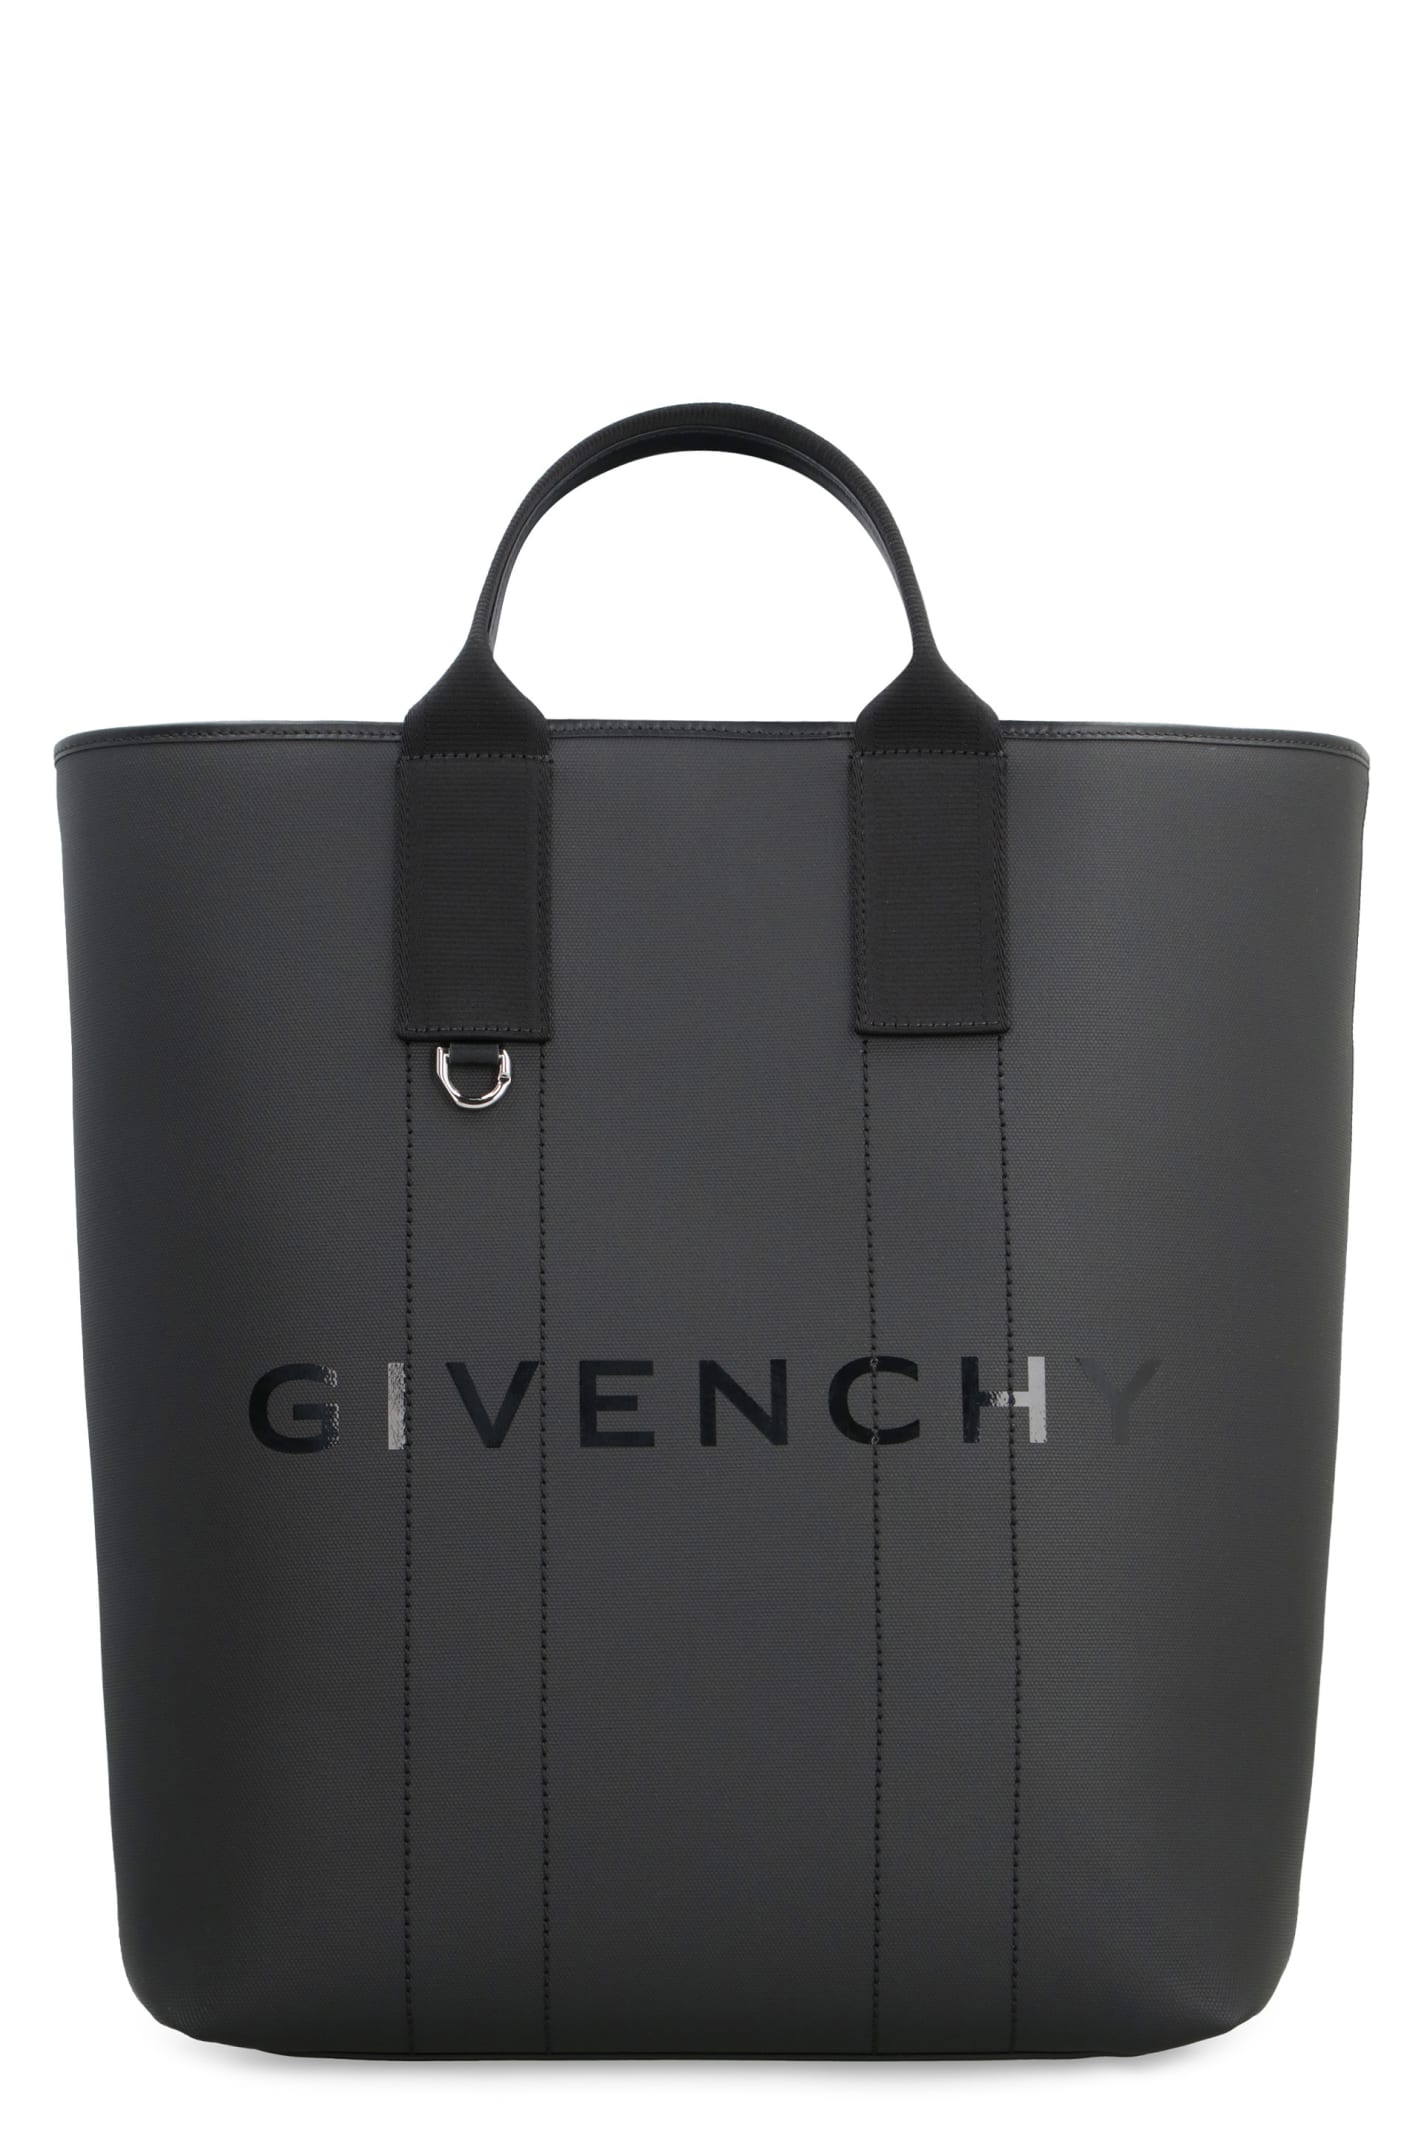 Givenchy G-essentials Canvas Tote Bag